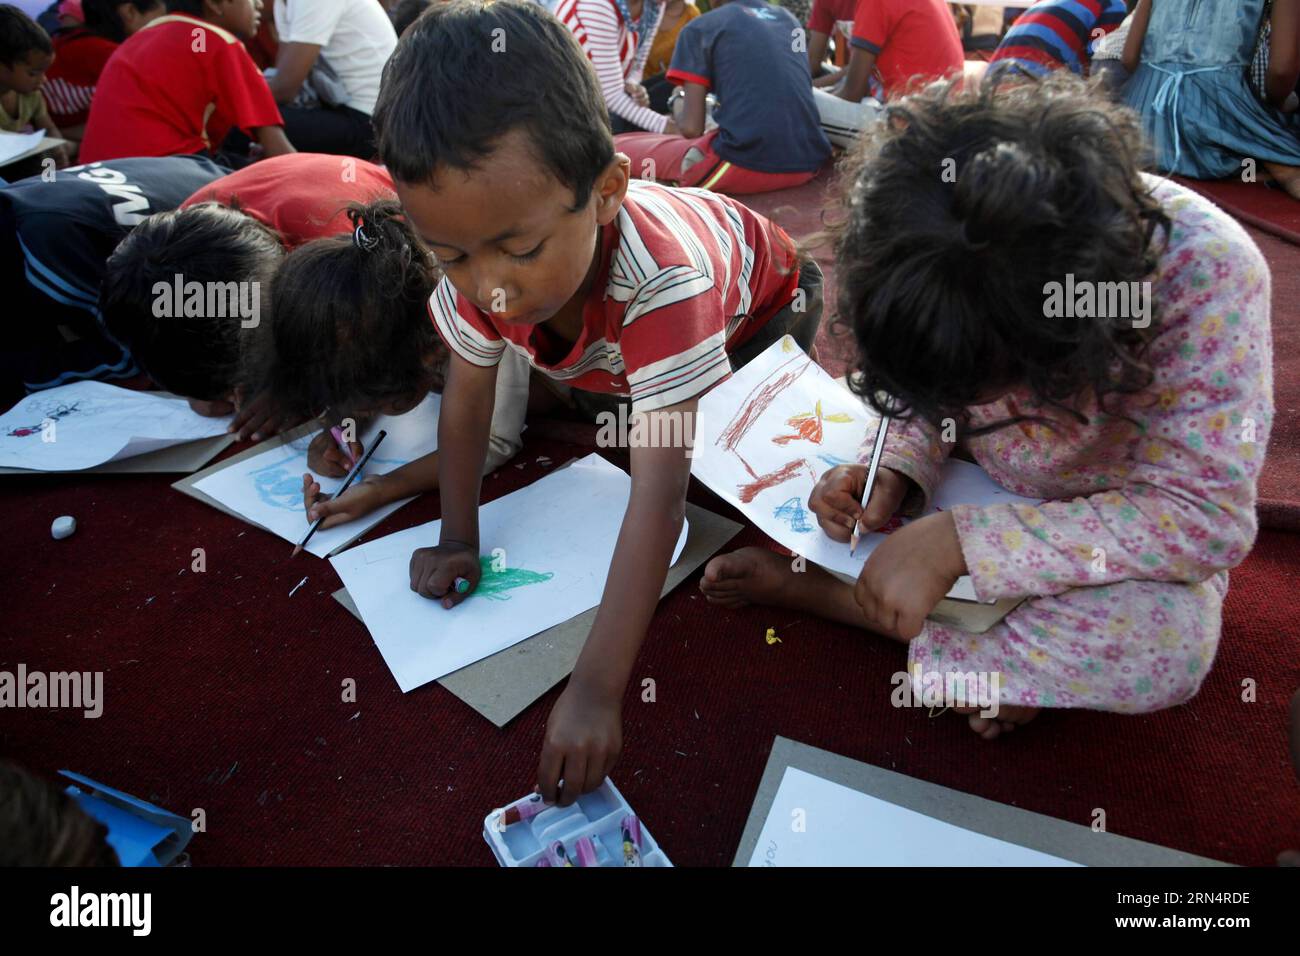 (150528) -- KATHMANDU, May 28, 2015 -- Children participate in a drawing class at a temporary shelter at Tundikhel in Kathmandu, capital of Nepal, on May 28, 2015. Shanti Education Initiative Nepal organized an art and craft program to help the quake-affected children to get out from quake trauma. ) NEPAL-KATHMANDU-EARTHQUAKE-AFTERMATH-CHILDREN PratapxThapa PUBLICATIONxNOTxINxCHN   150528 Kathmandu May 28 2015 Children participate in a drawing Class AT a temporary Shelter AT Tundikhel in Kathmandu Capital of Nepal ON May 28 2015 Shanti Education Initiative Nepal Organized to Art and Craft Prog Stock Photo